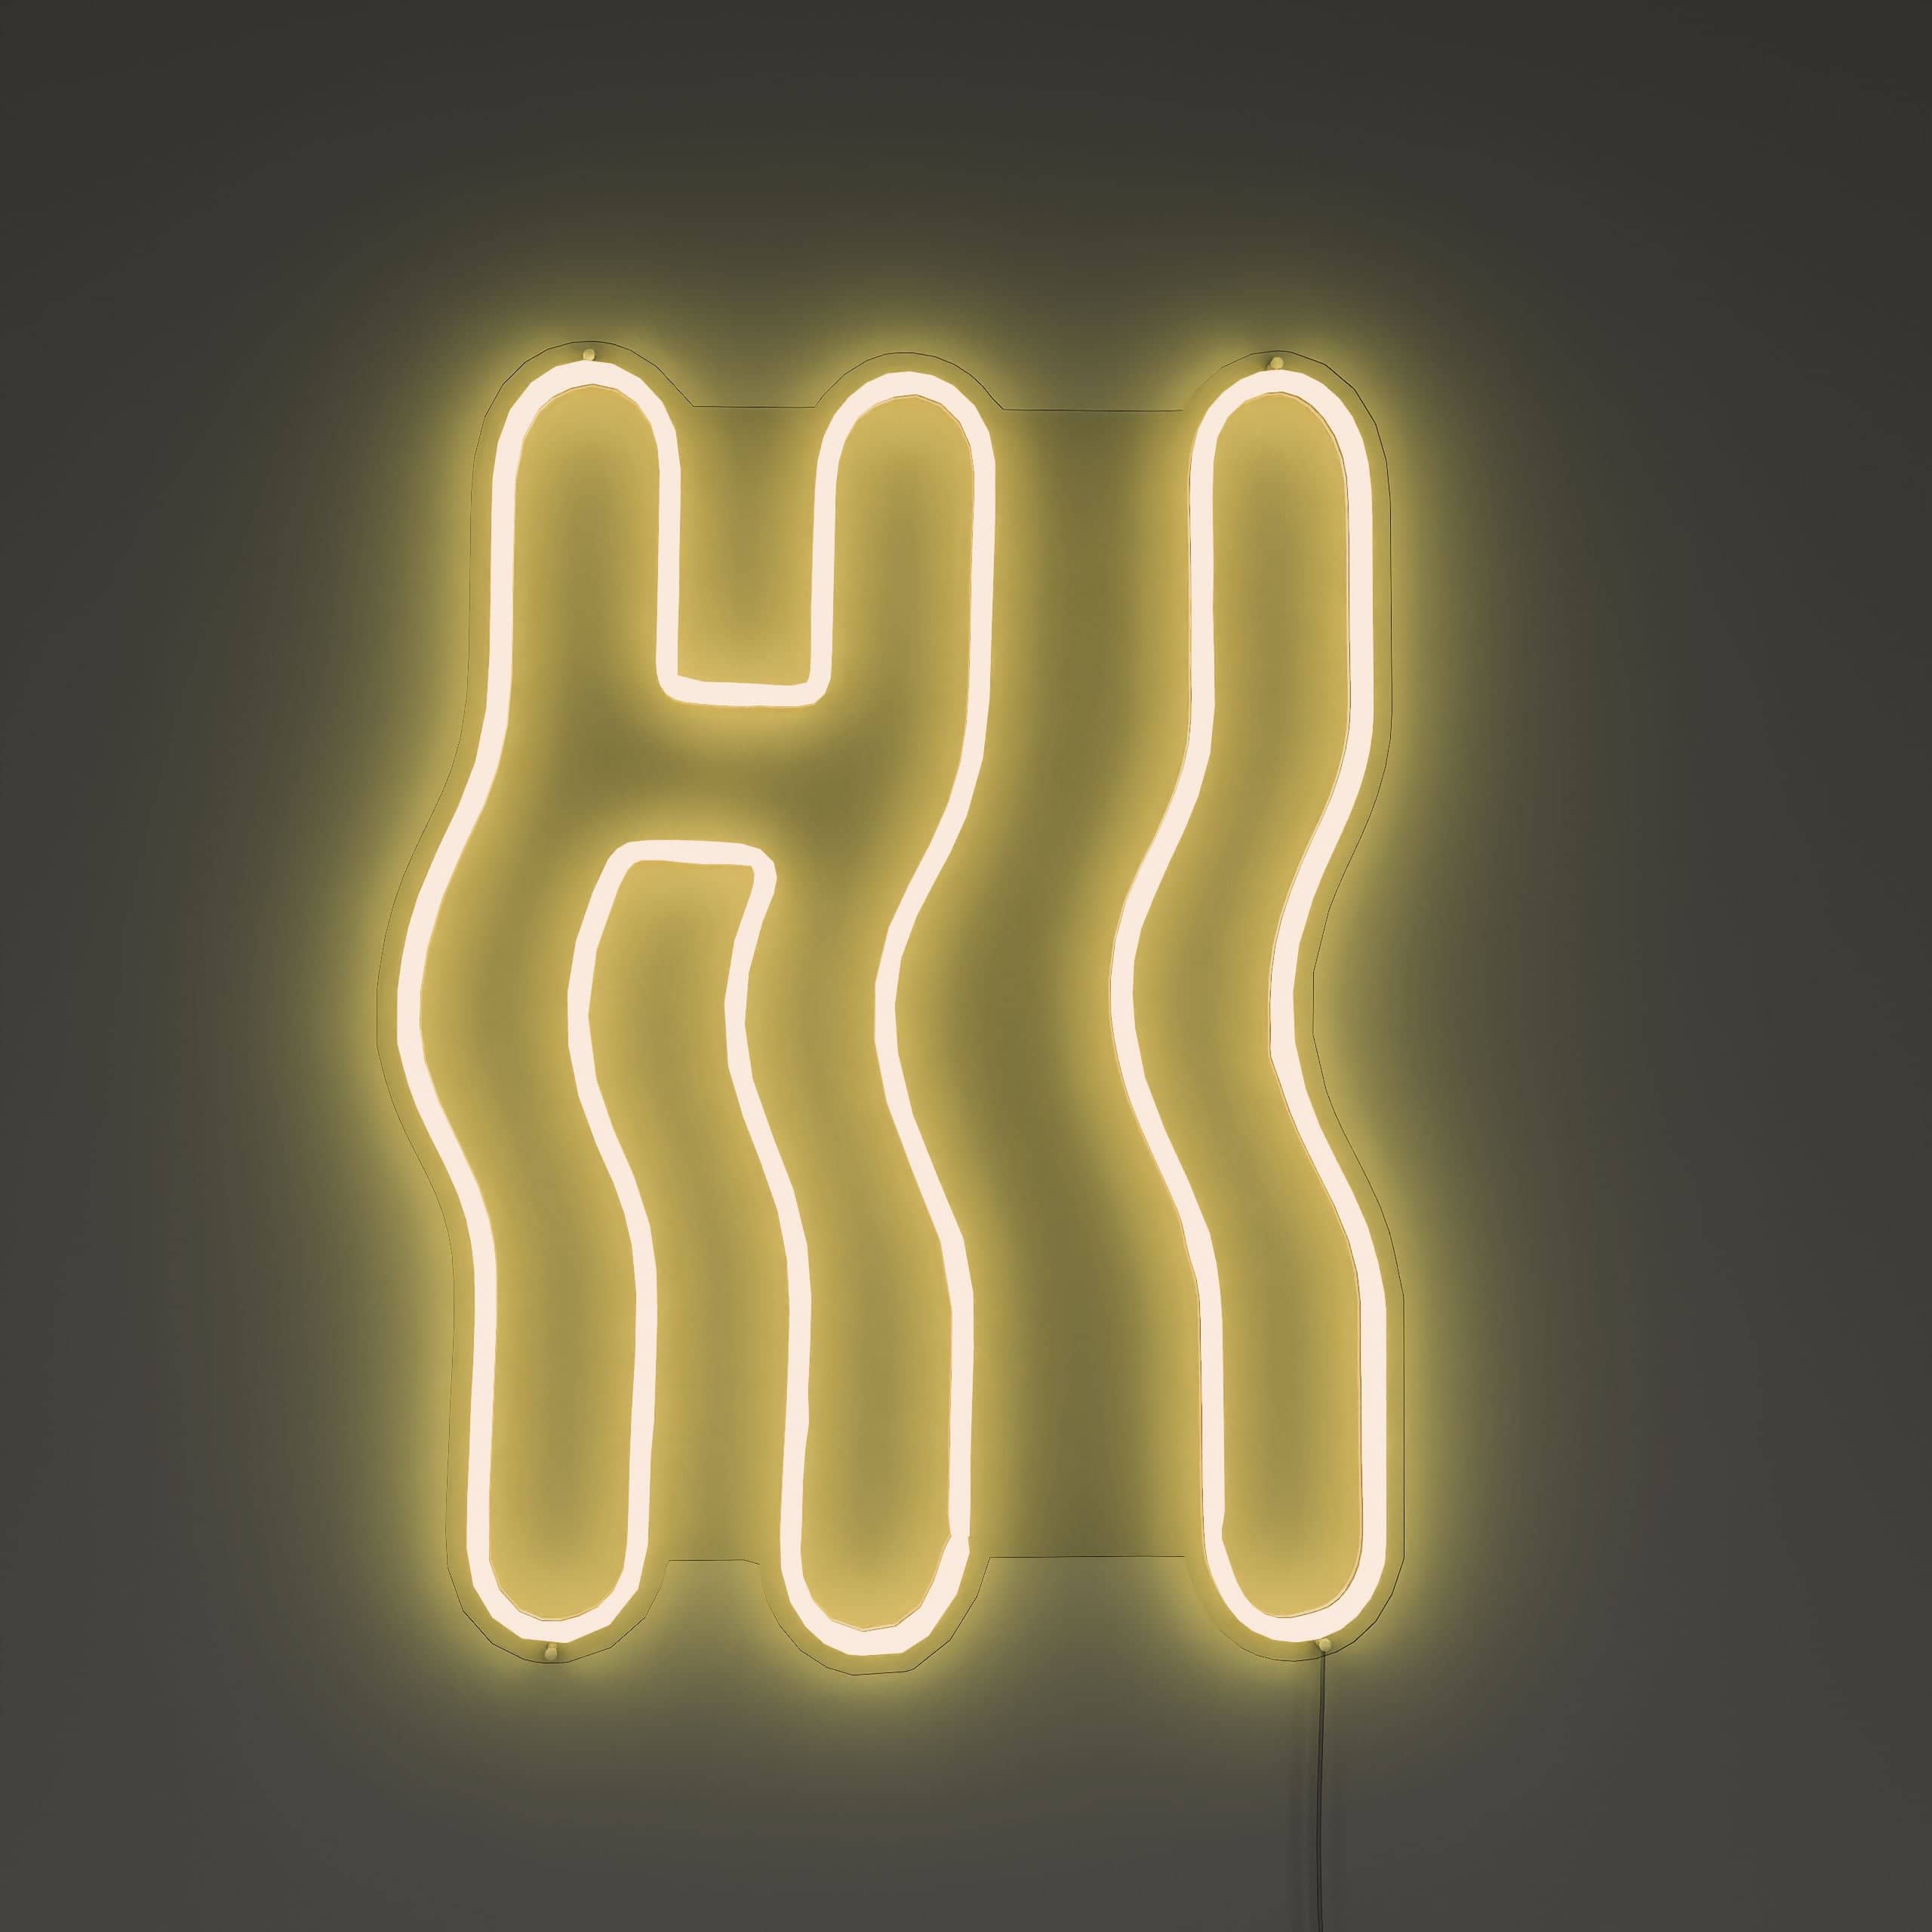 hi,-how-are-you?-neon-sign-lite